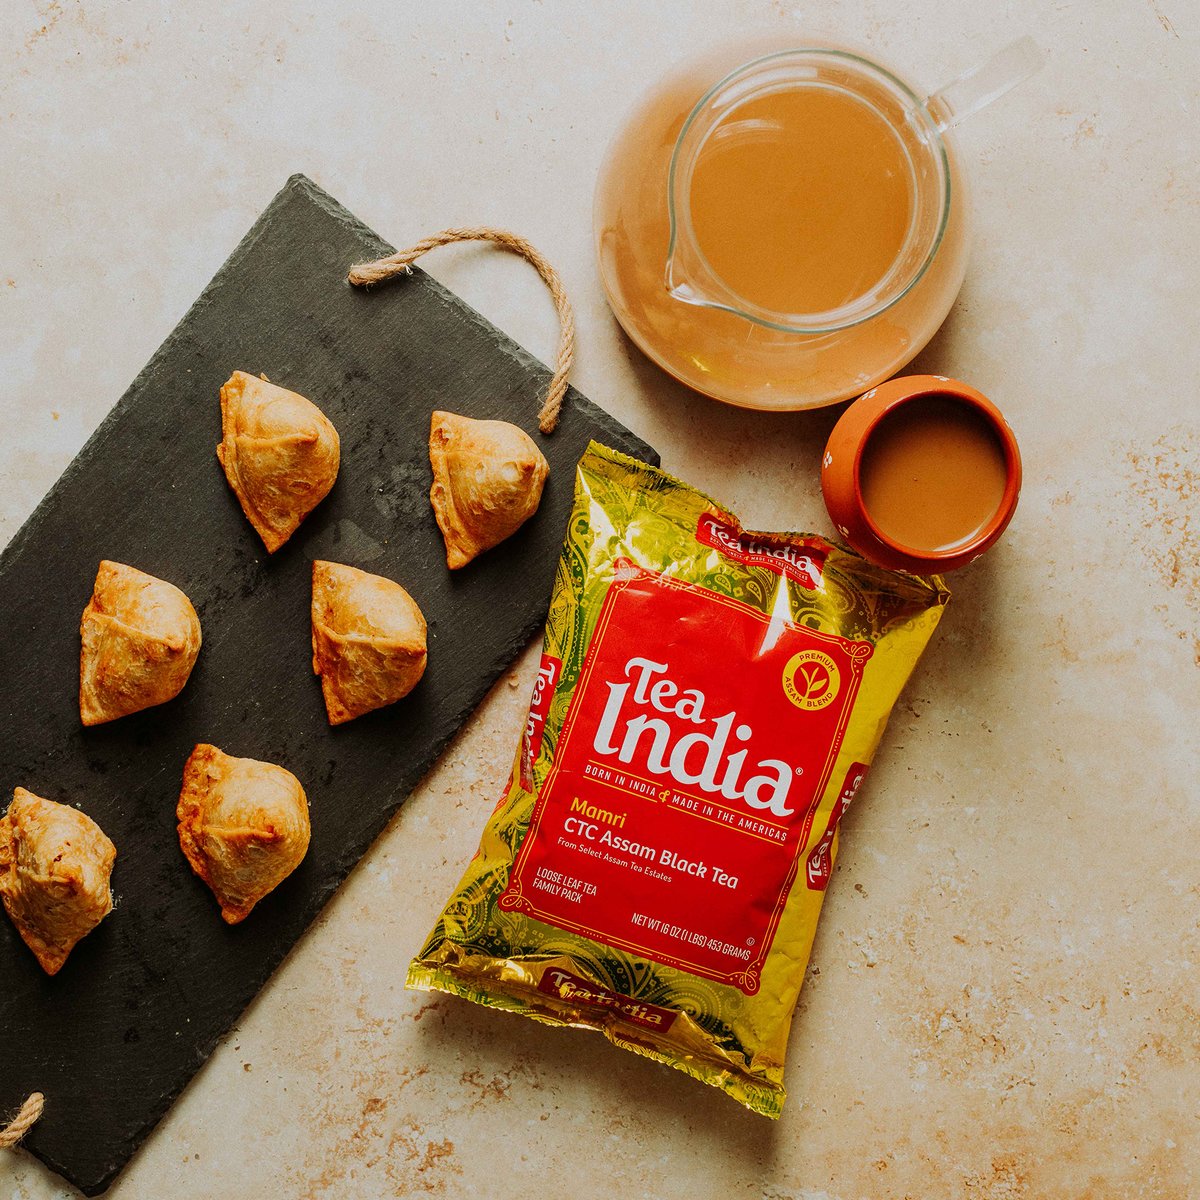 Craving a flavourful treat? Dive into spicy samosas, perfectly complemented by the soothing warmth of chai. It's the ultimate comfort food combo! 😋☕
.
.
.

#TeaIndiaCA #BestCombo #PerfectMatch #Assam #AsssamTea #ChaiTea #IndianTea #ChaiTime #Comforting #SelfCare #ChaiBreak